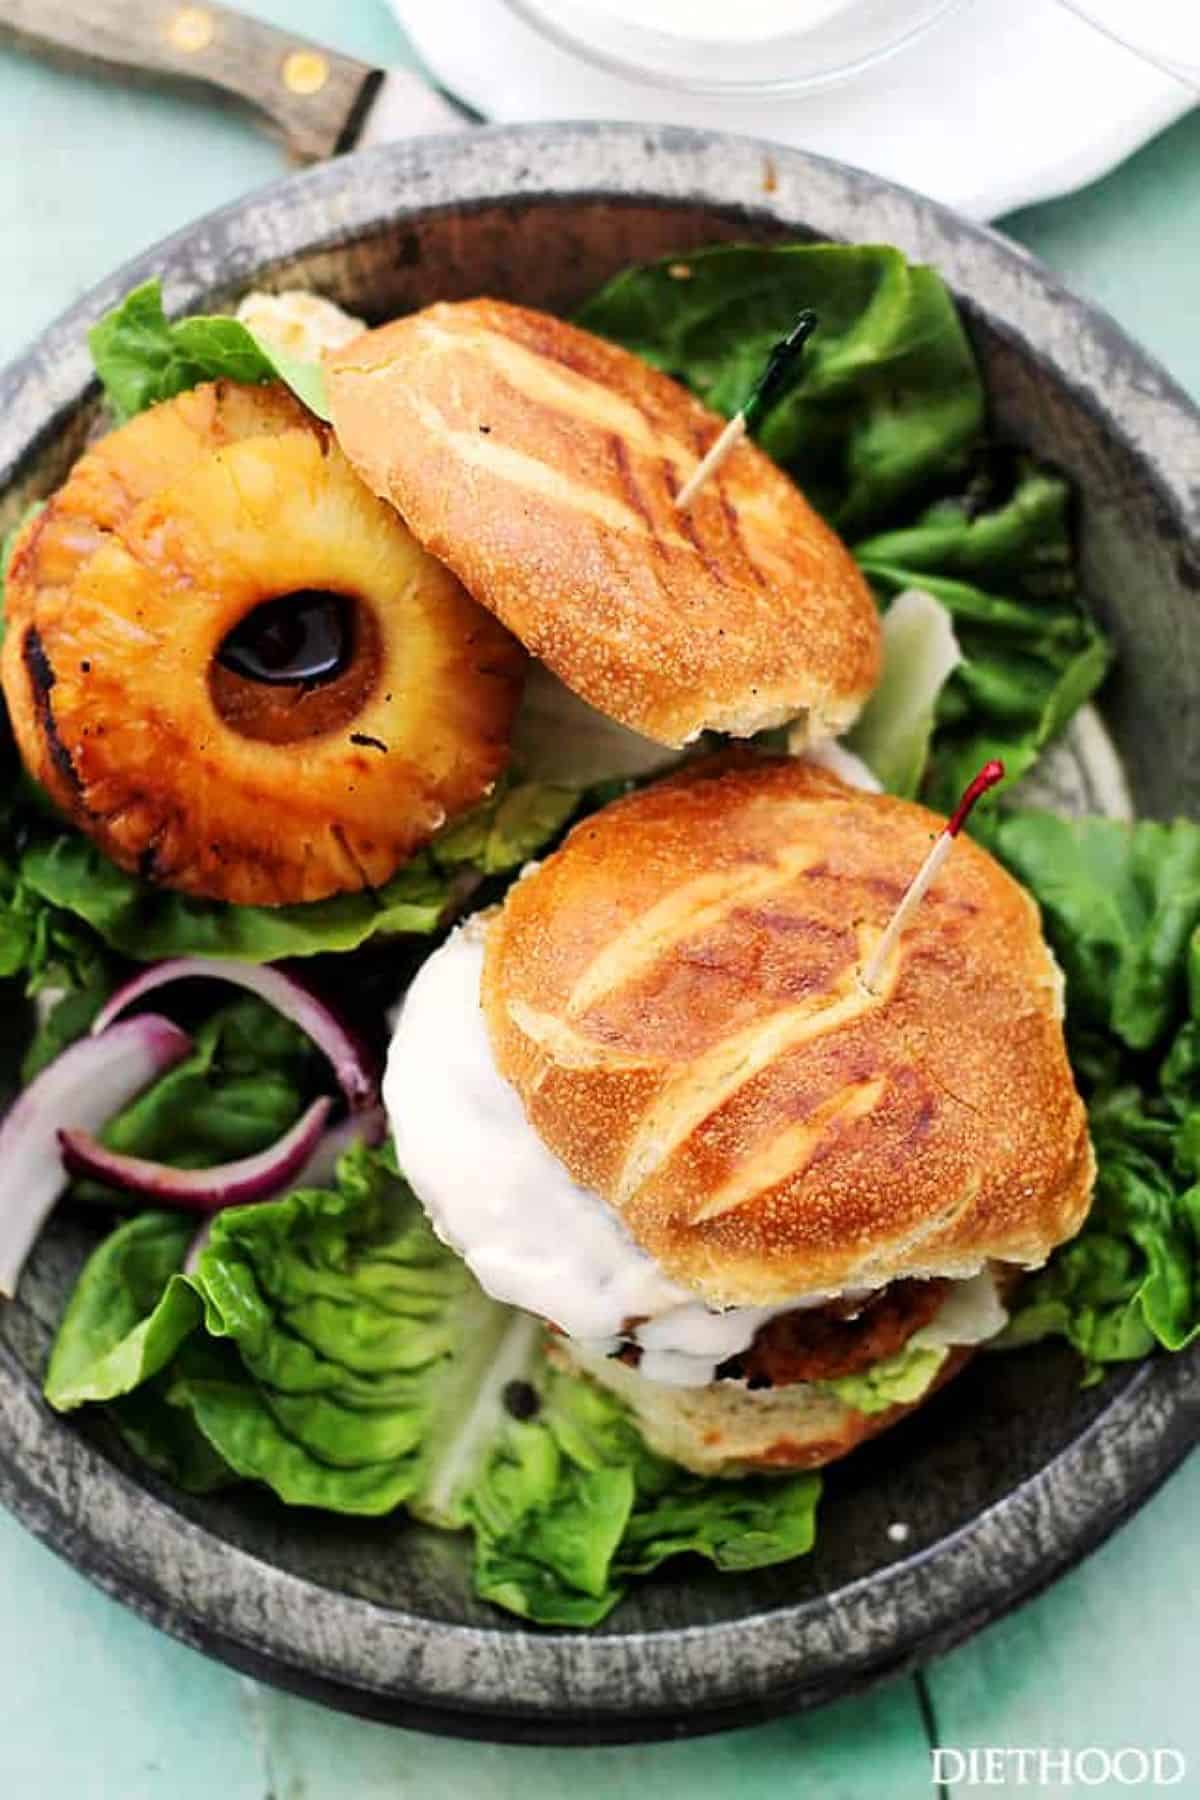 Salmon burgers with pineapple rings.